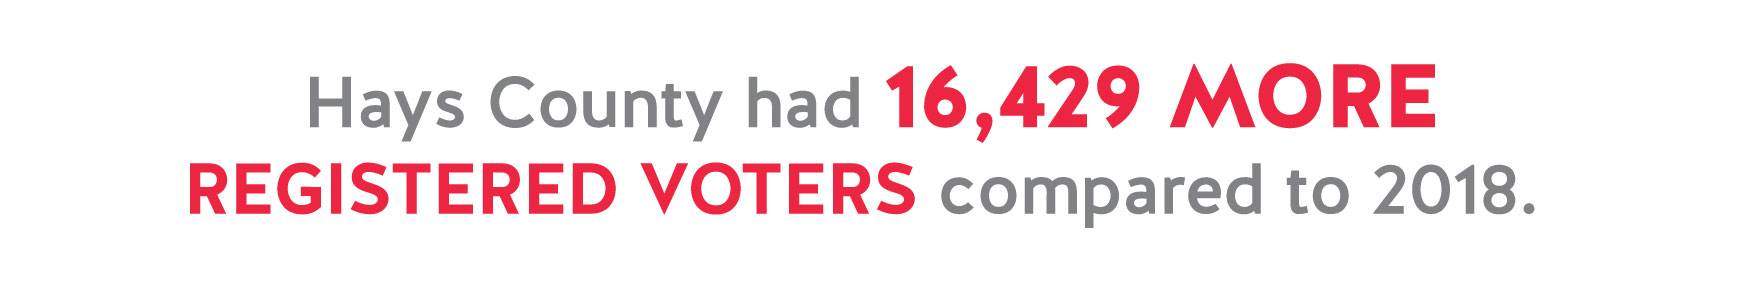 Hays County had 16,429 more registered voters compared to 2018.